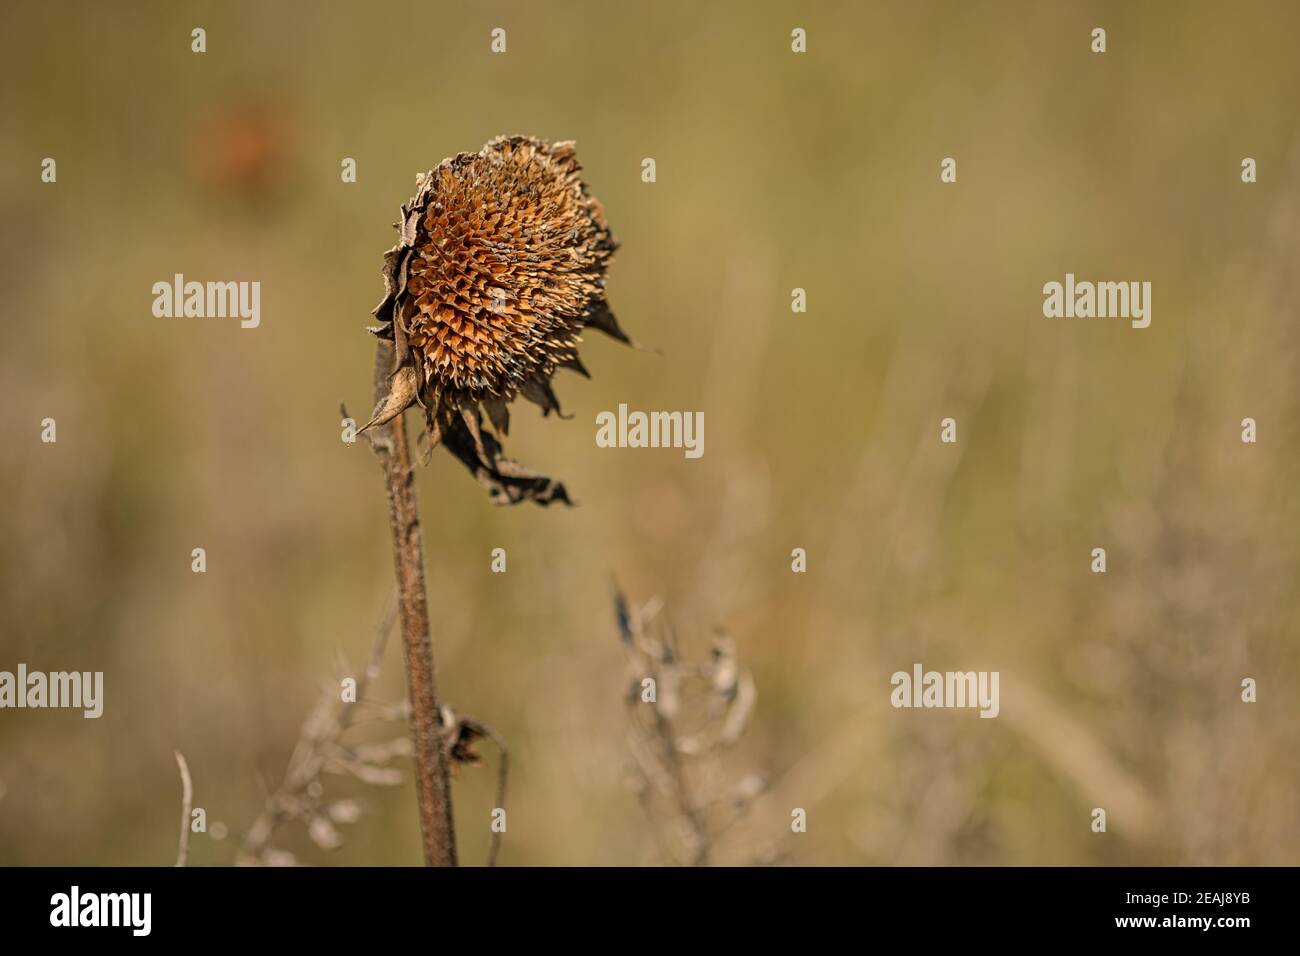 Dried brown sunflower in autumn Stock Photo